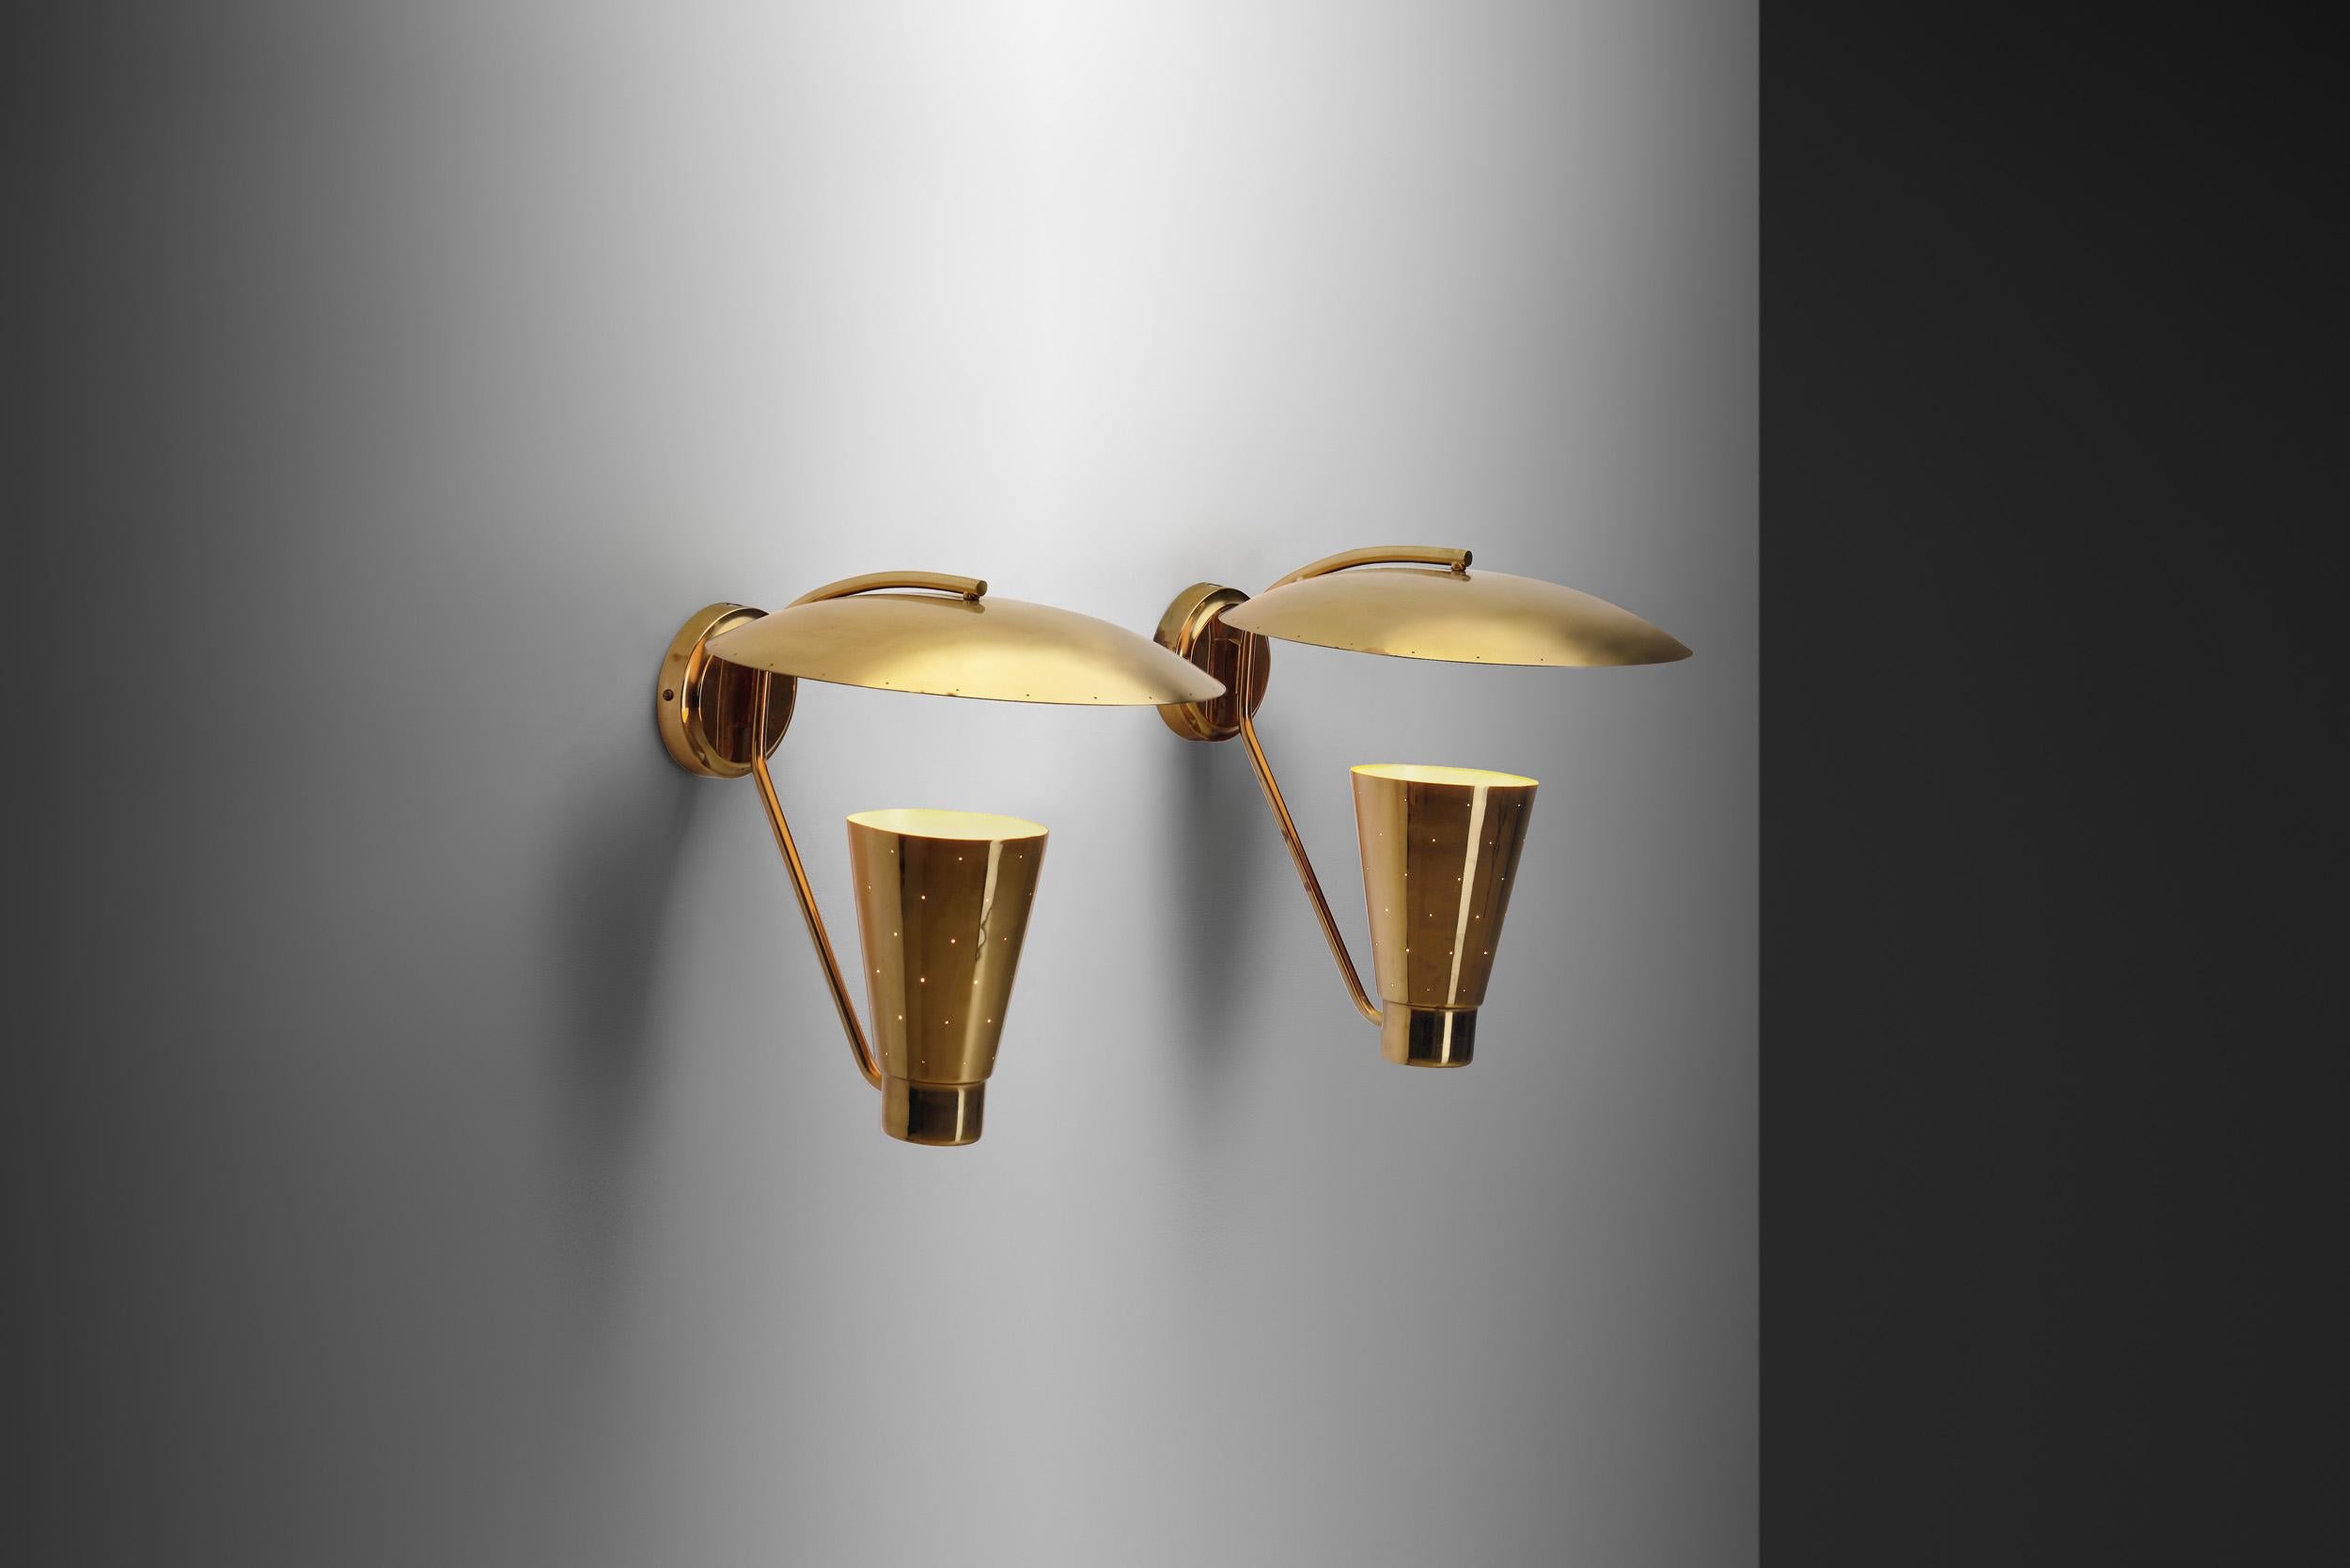 This pair of wall lights was designed during the 1950s, an era in which Finland saw the birth of many of its most iconic lighting models. It was a period of consistency, excellence, and sophistication design wise. Itsu, short for Itä-Suomen Sähkö